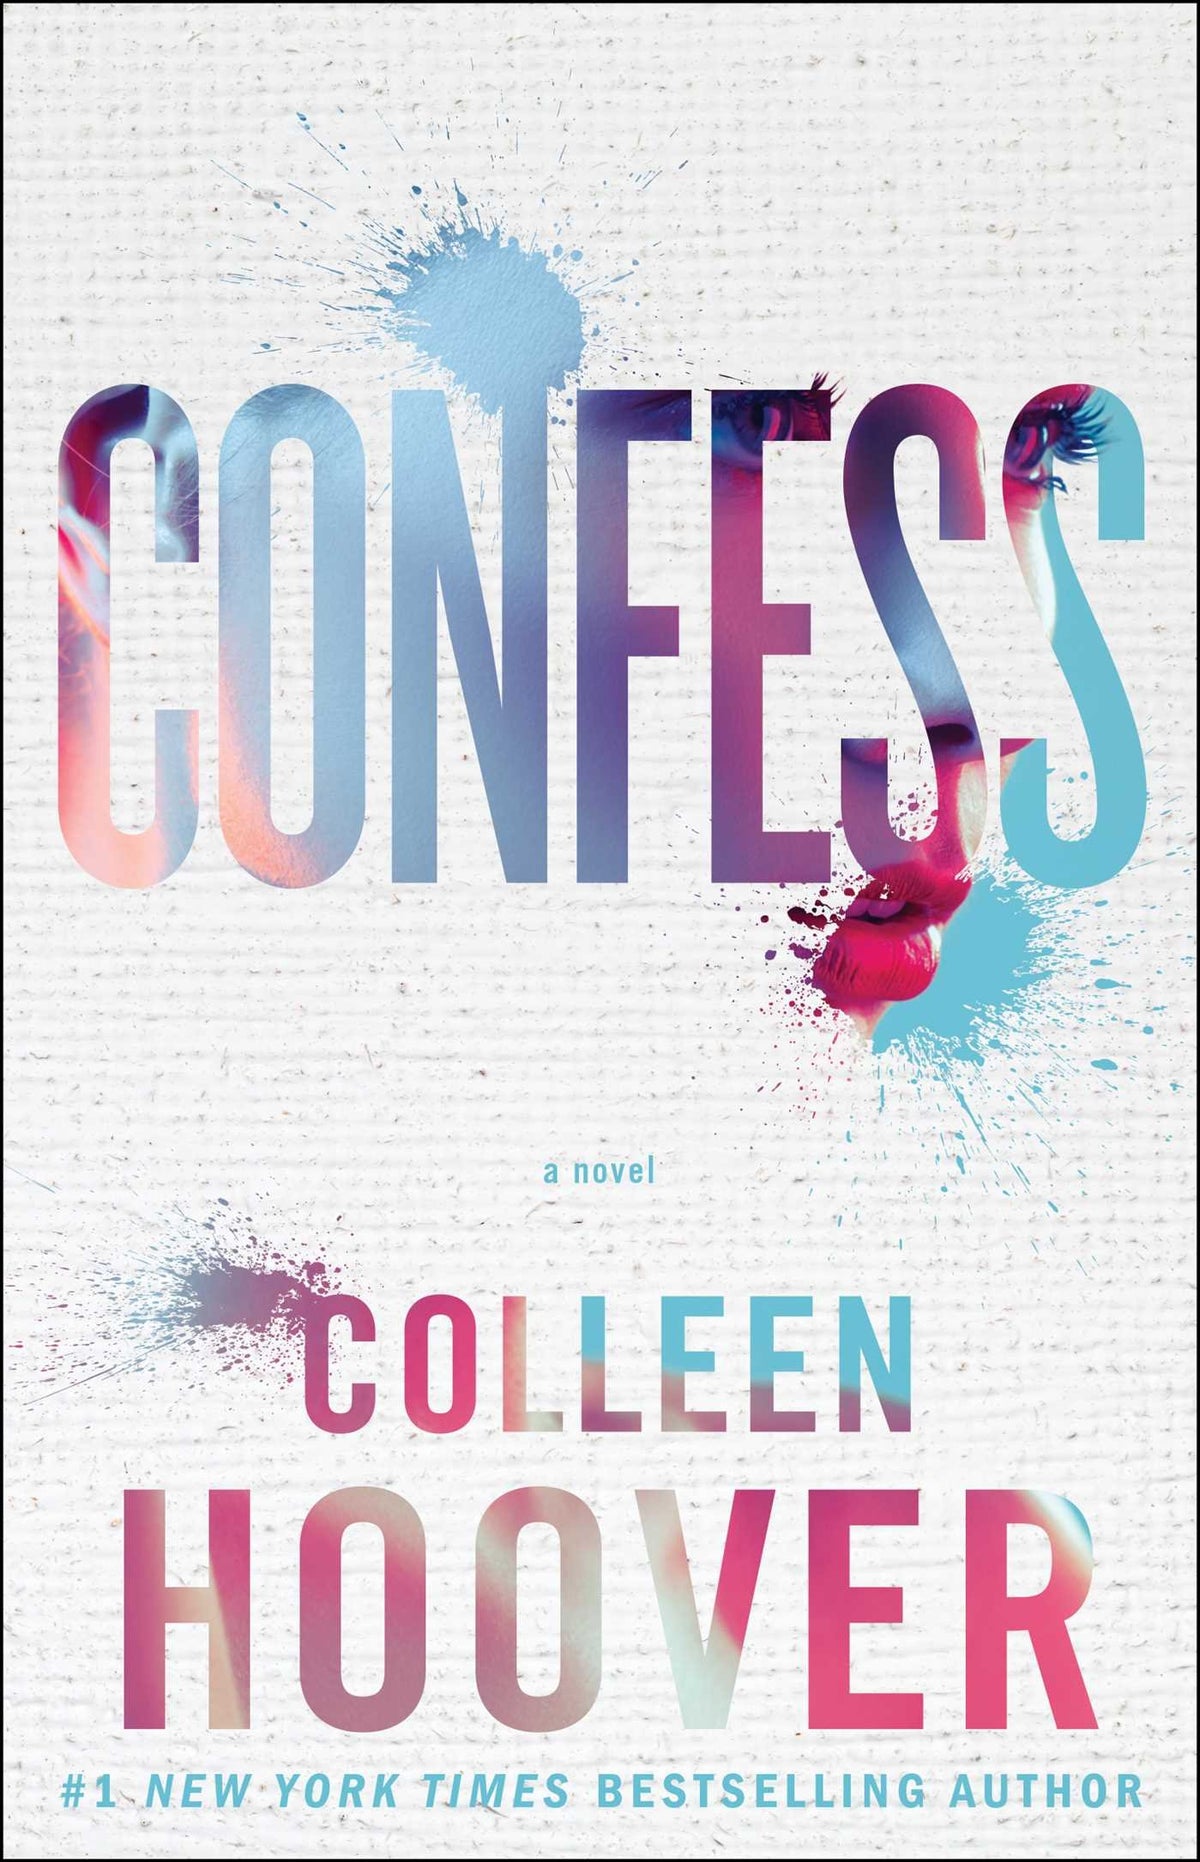 Confess: A Novel by Hoover, Colleen